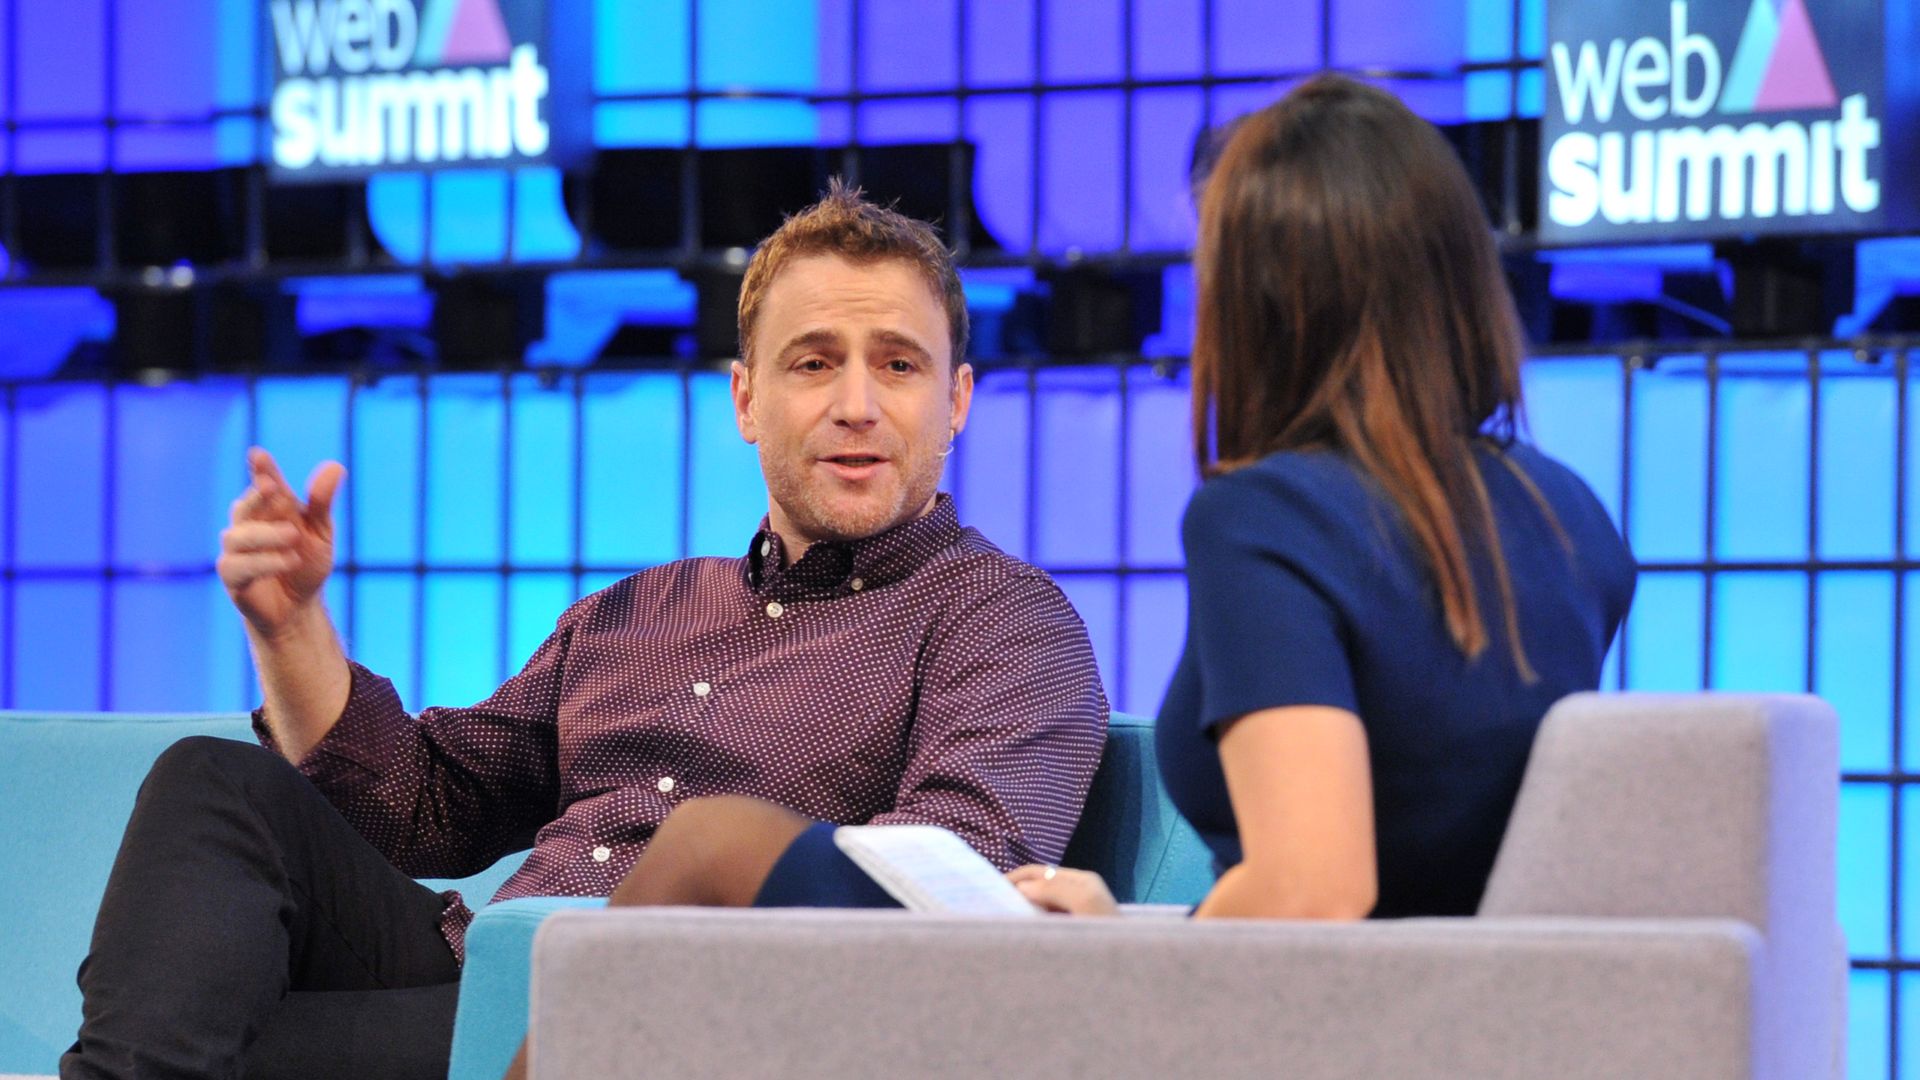 Photo of Slack CEO Stewart Butterfield speaking on conference stage.